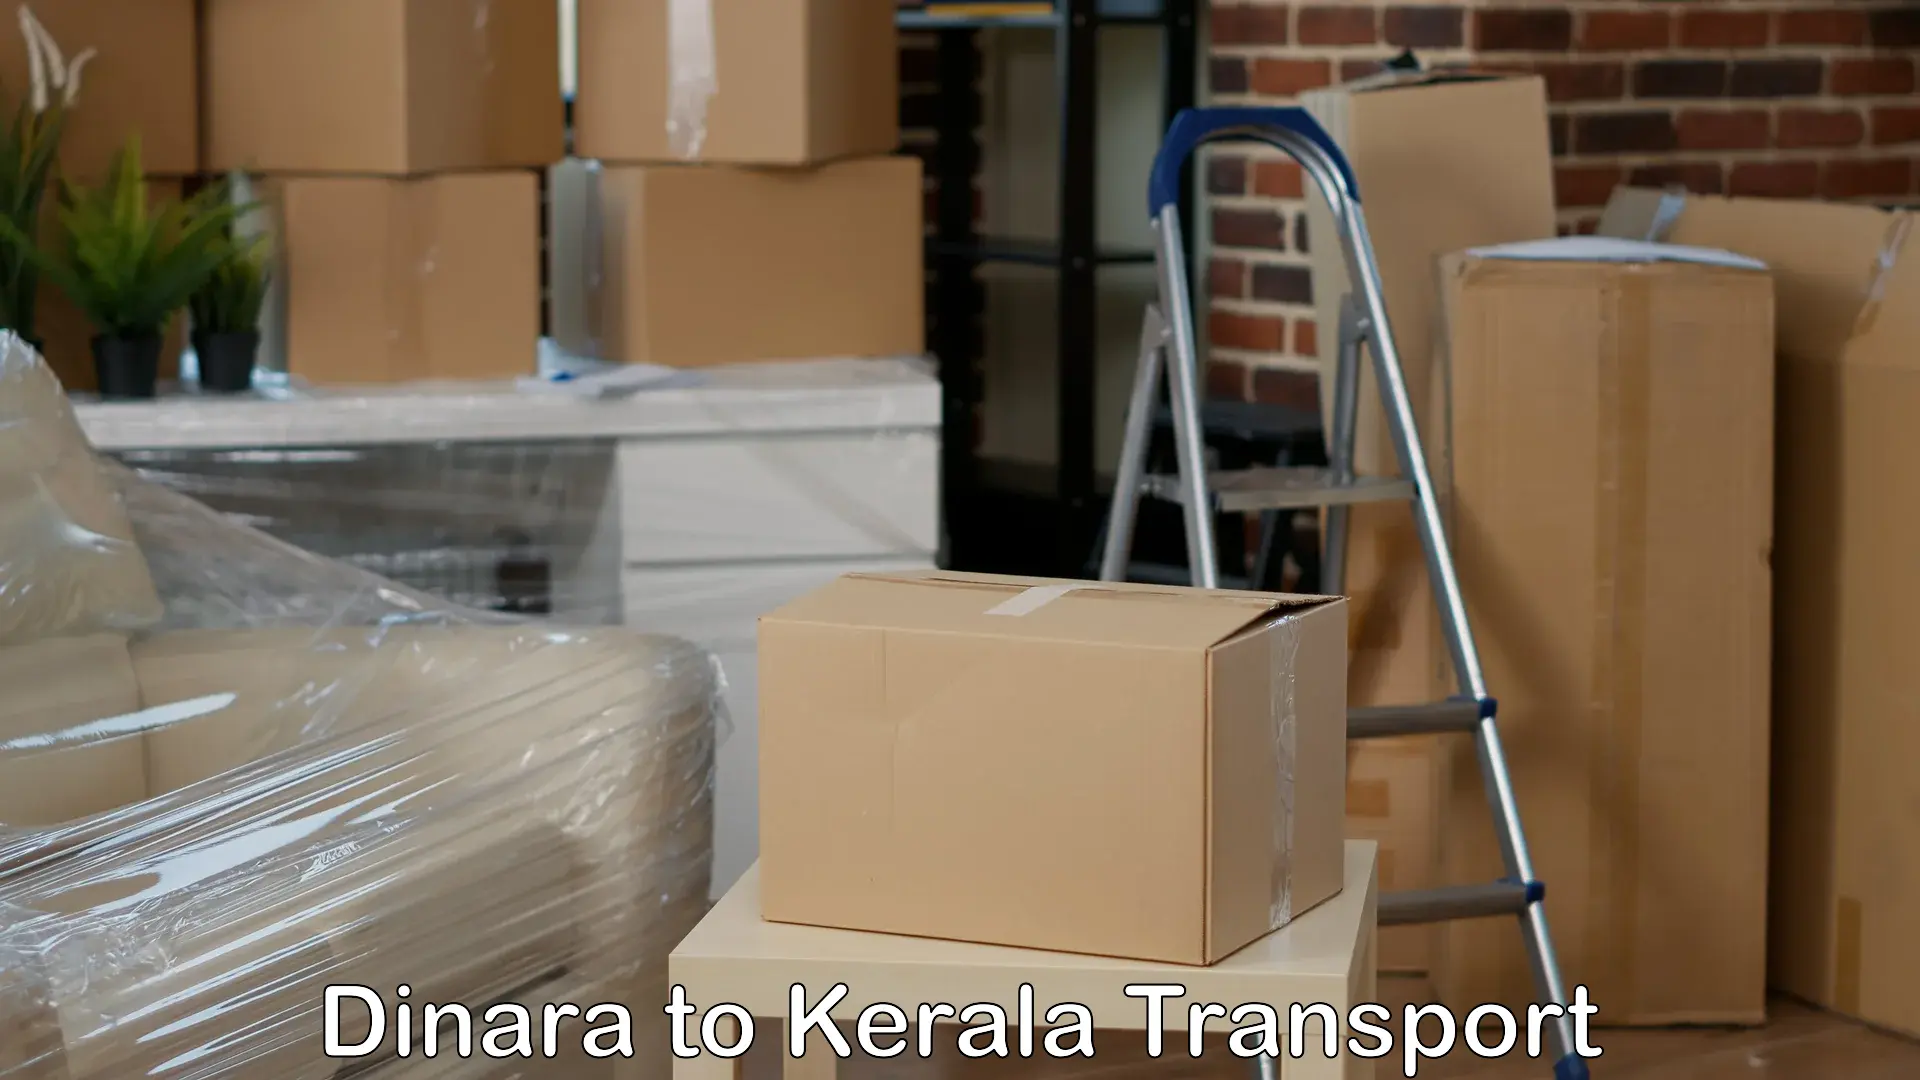 Daily parcel service transport Dinara to Cochin